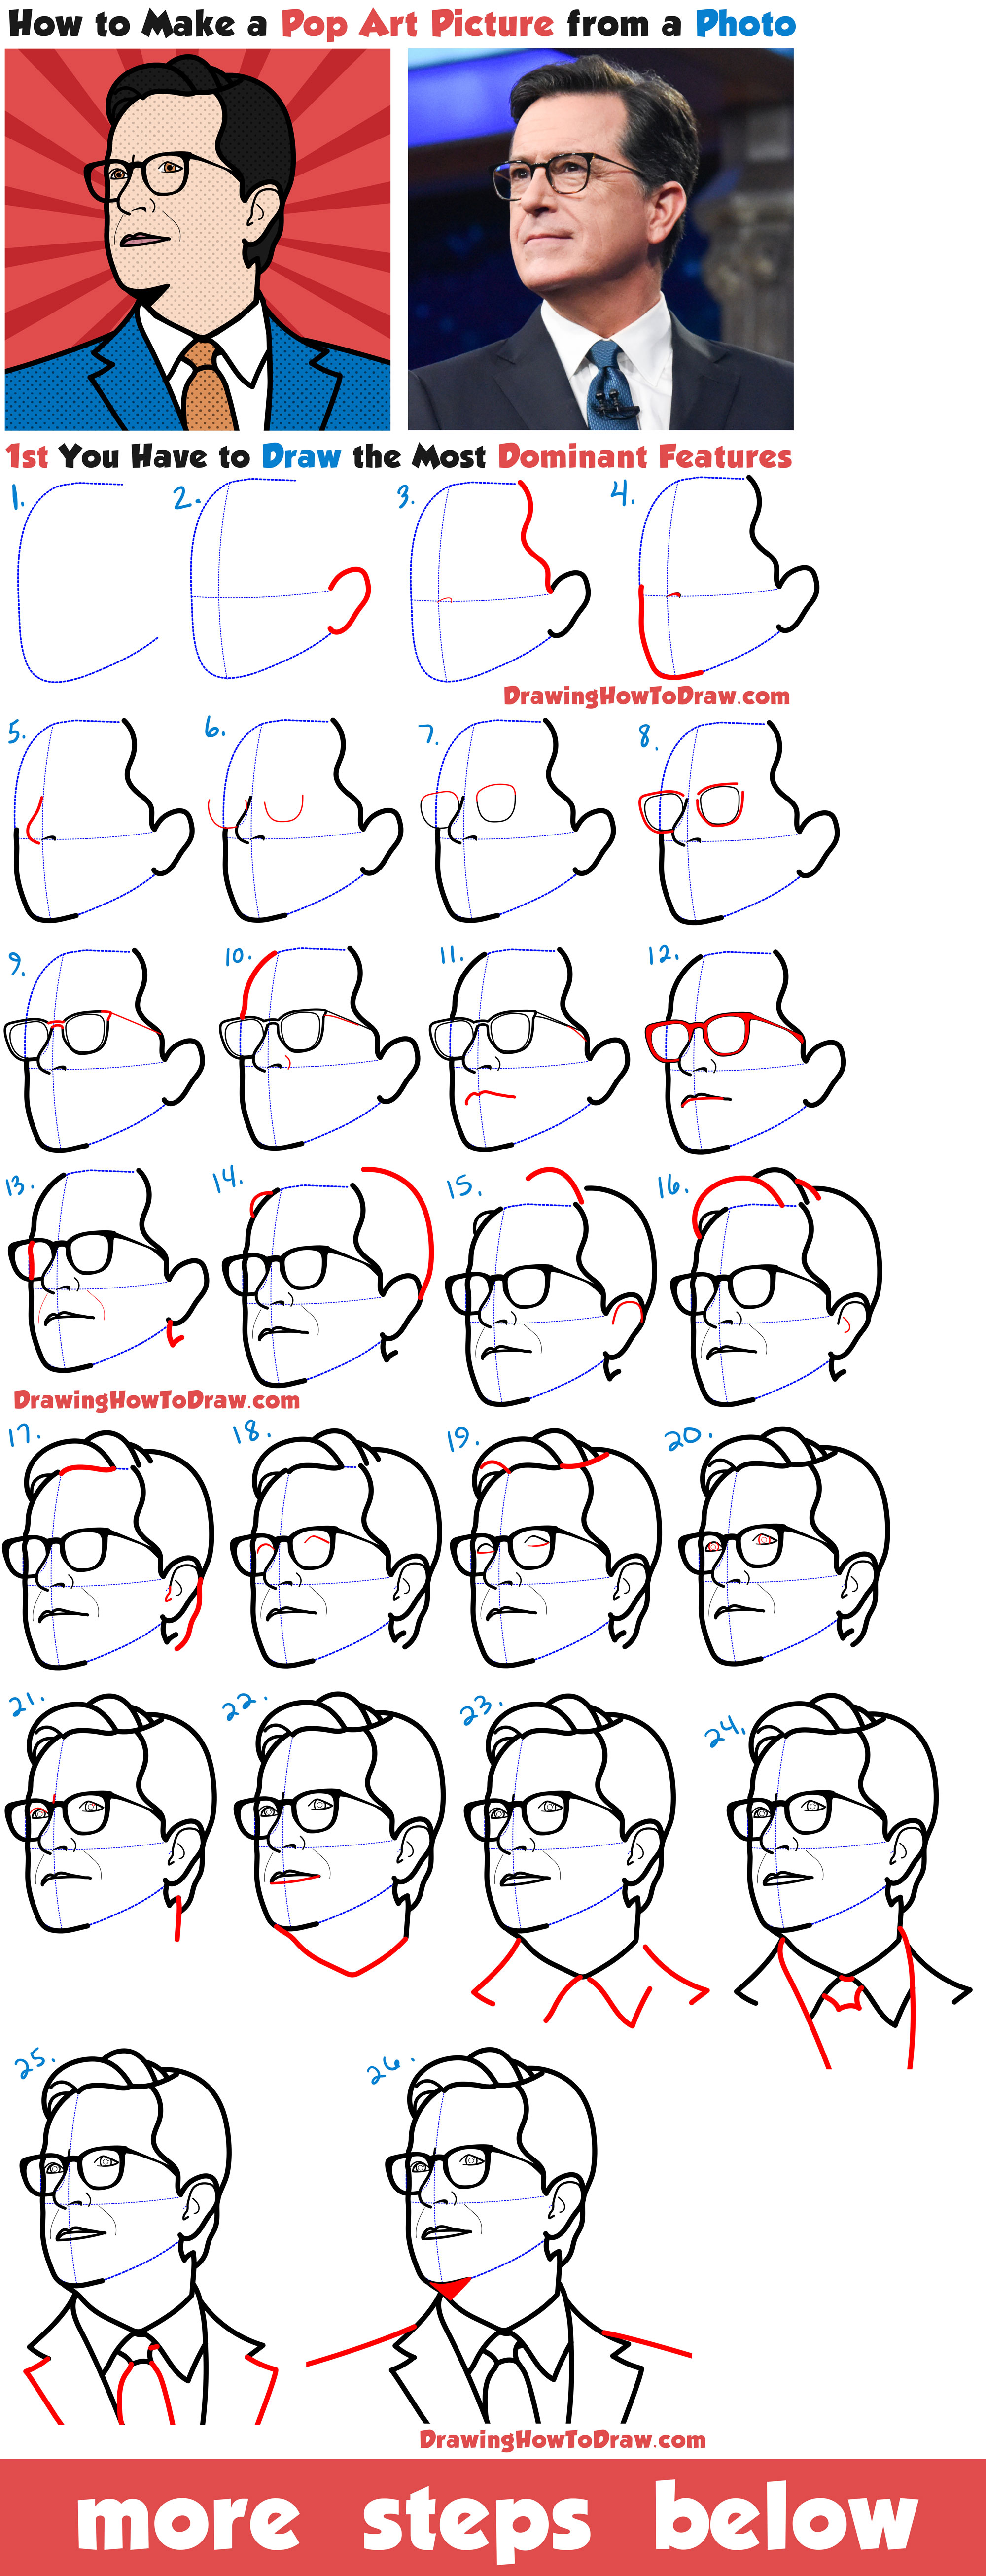 How to Turn a Photo into a Comic Style Pop Art Picture (Stephen Colbert) Easy Step by Step Drawing Tutorial